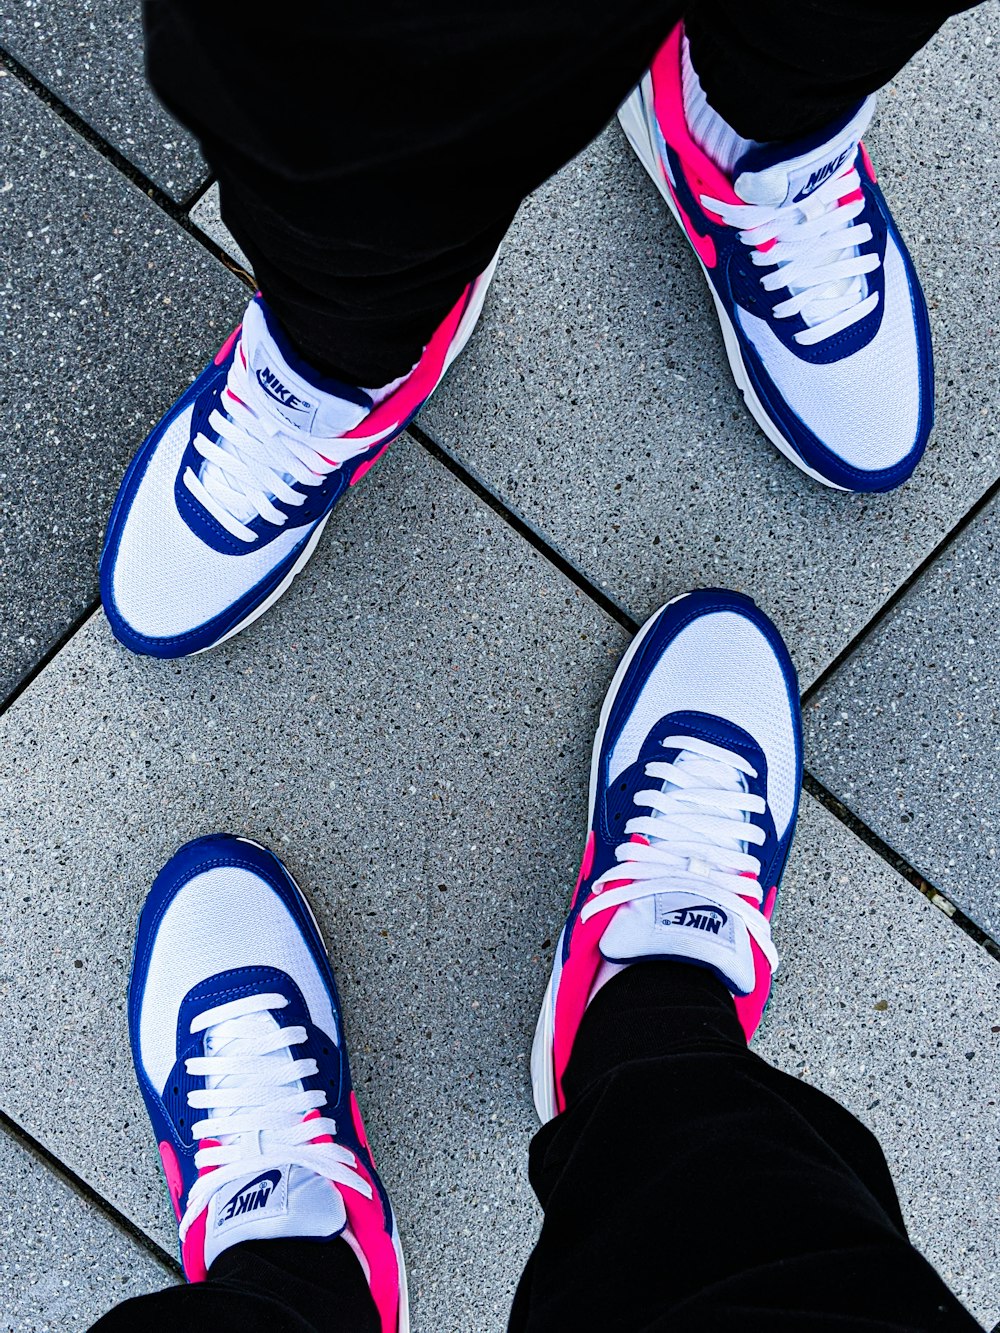 person wearing white and purple nike sneakers